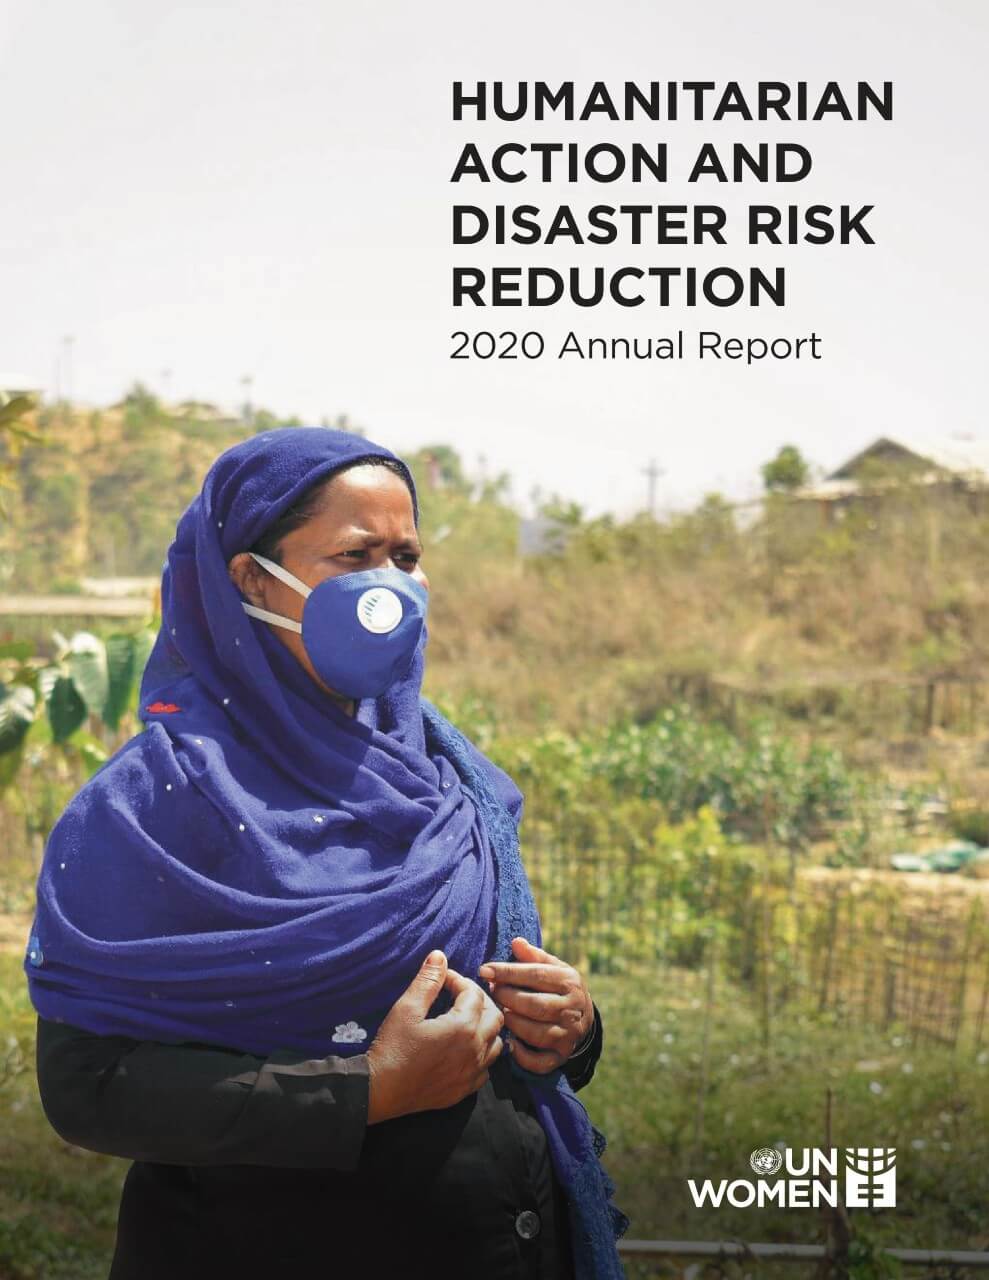 Humanitarian action and disaster risk reduction: 2020 annual report